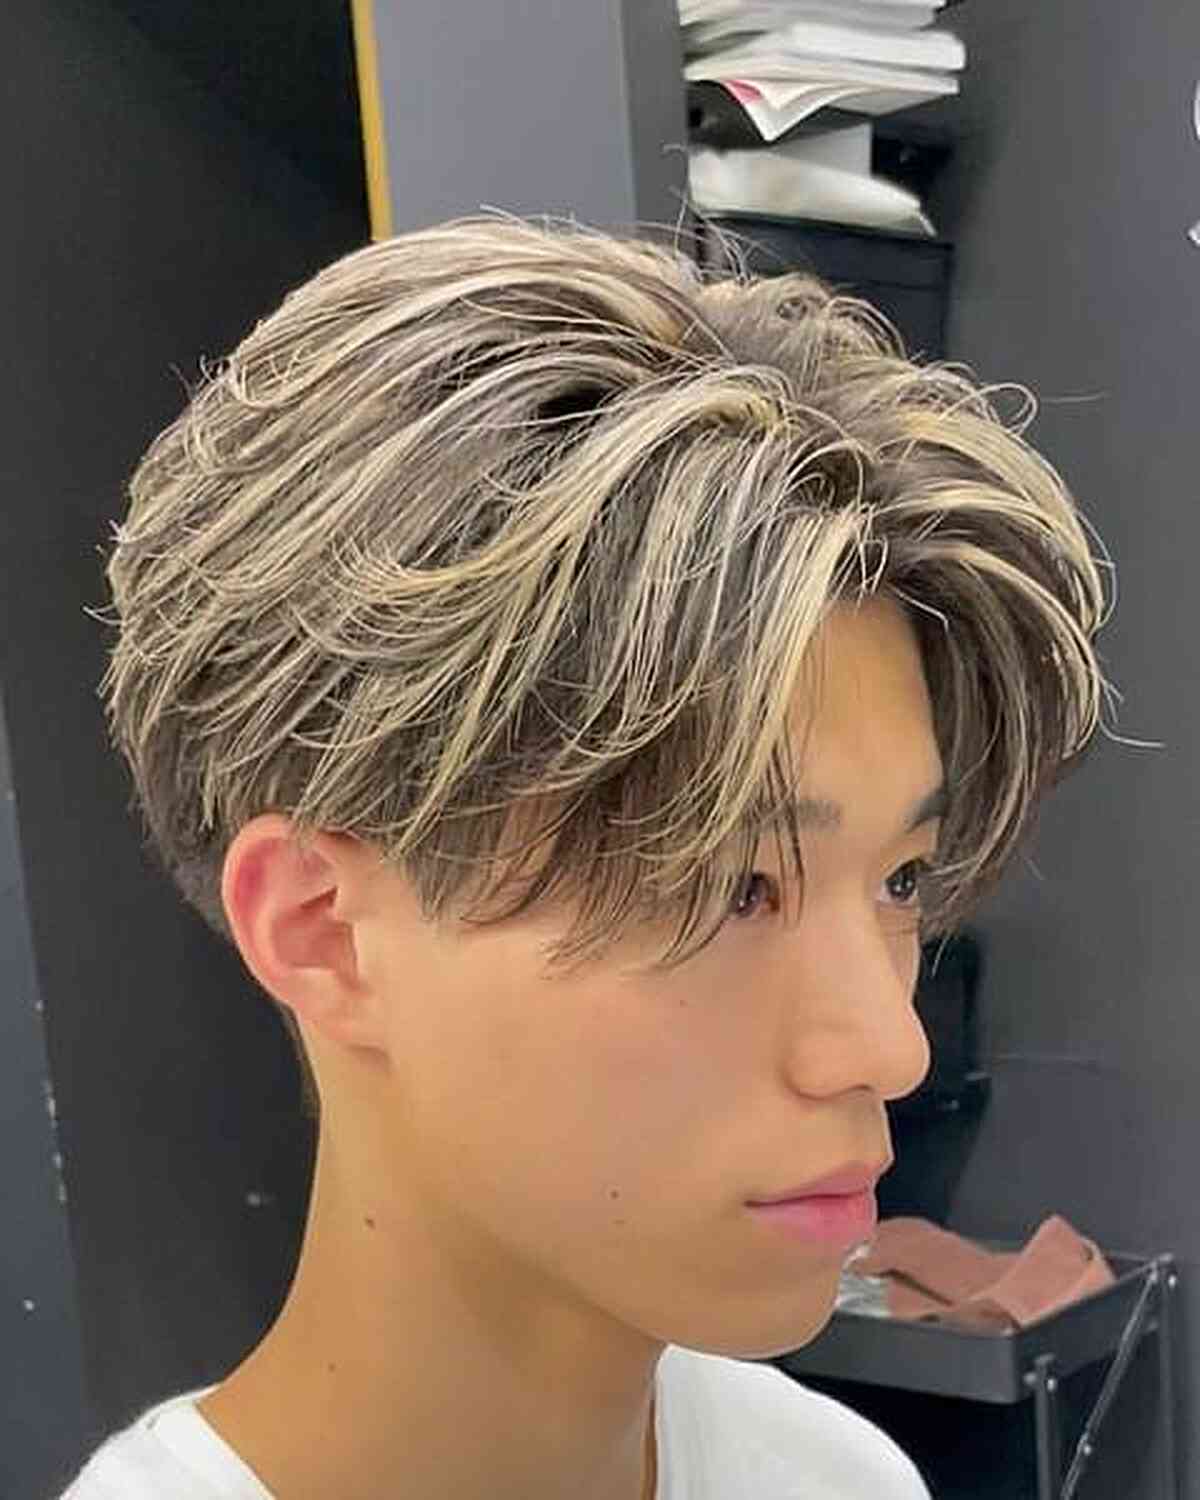 Kpop Two-Block with Blonde Highlights for Men